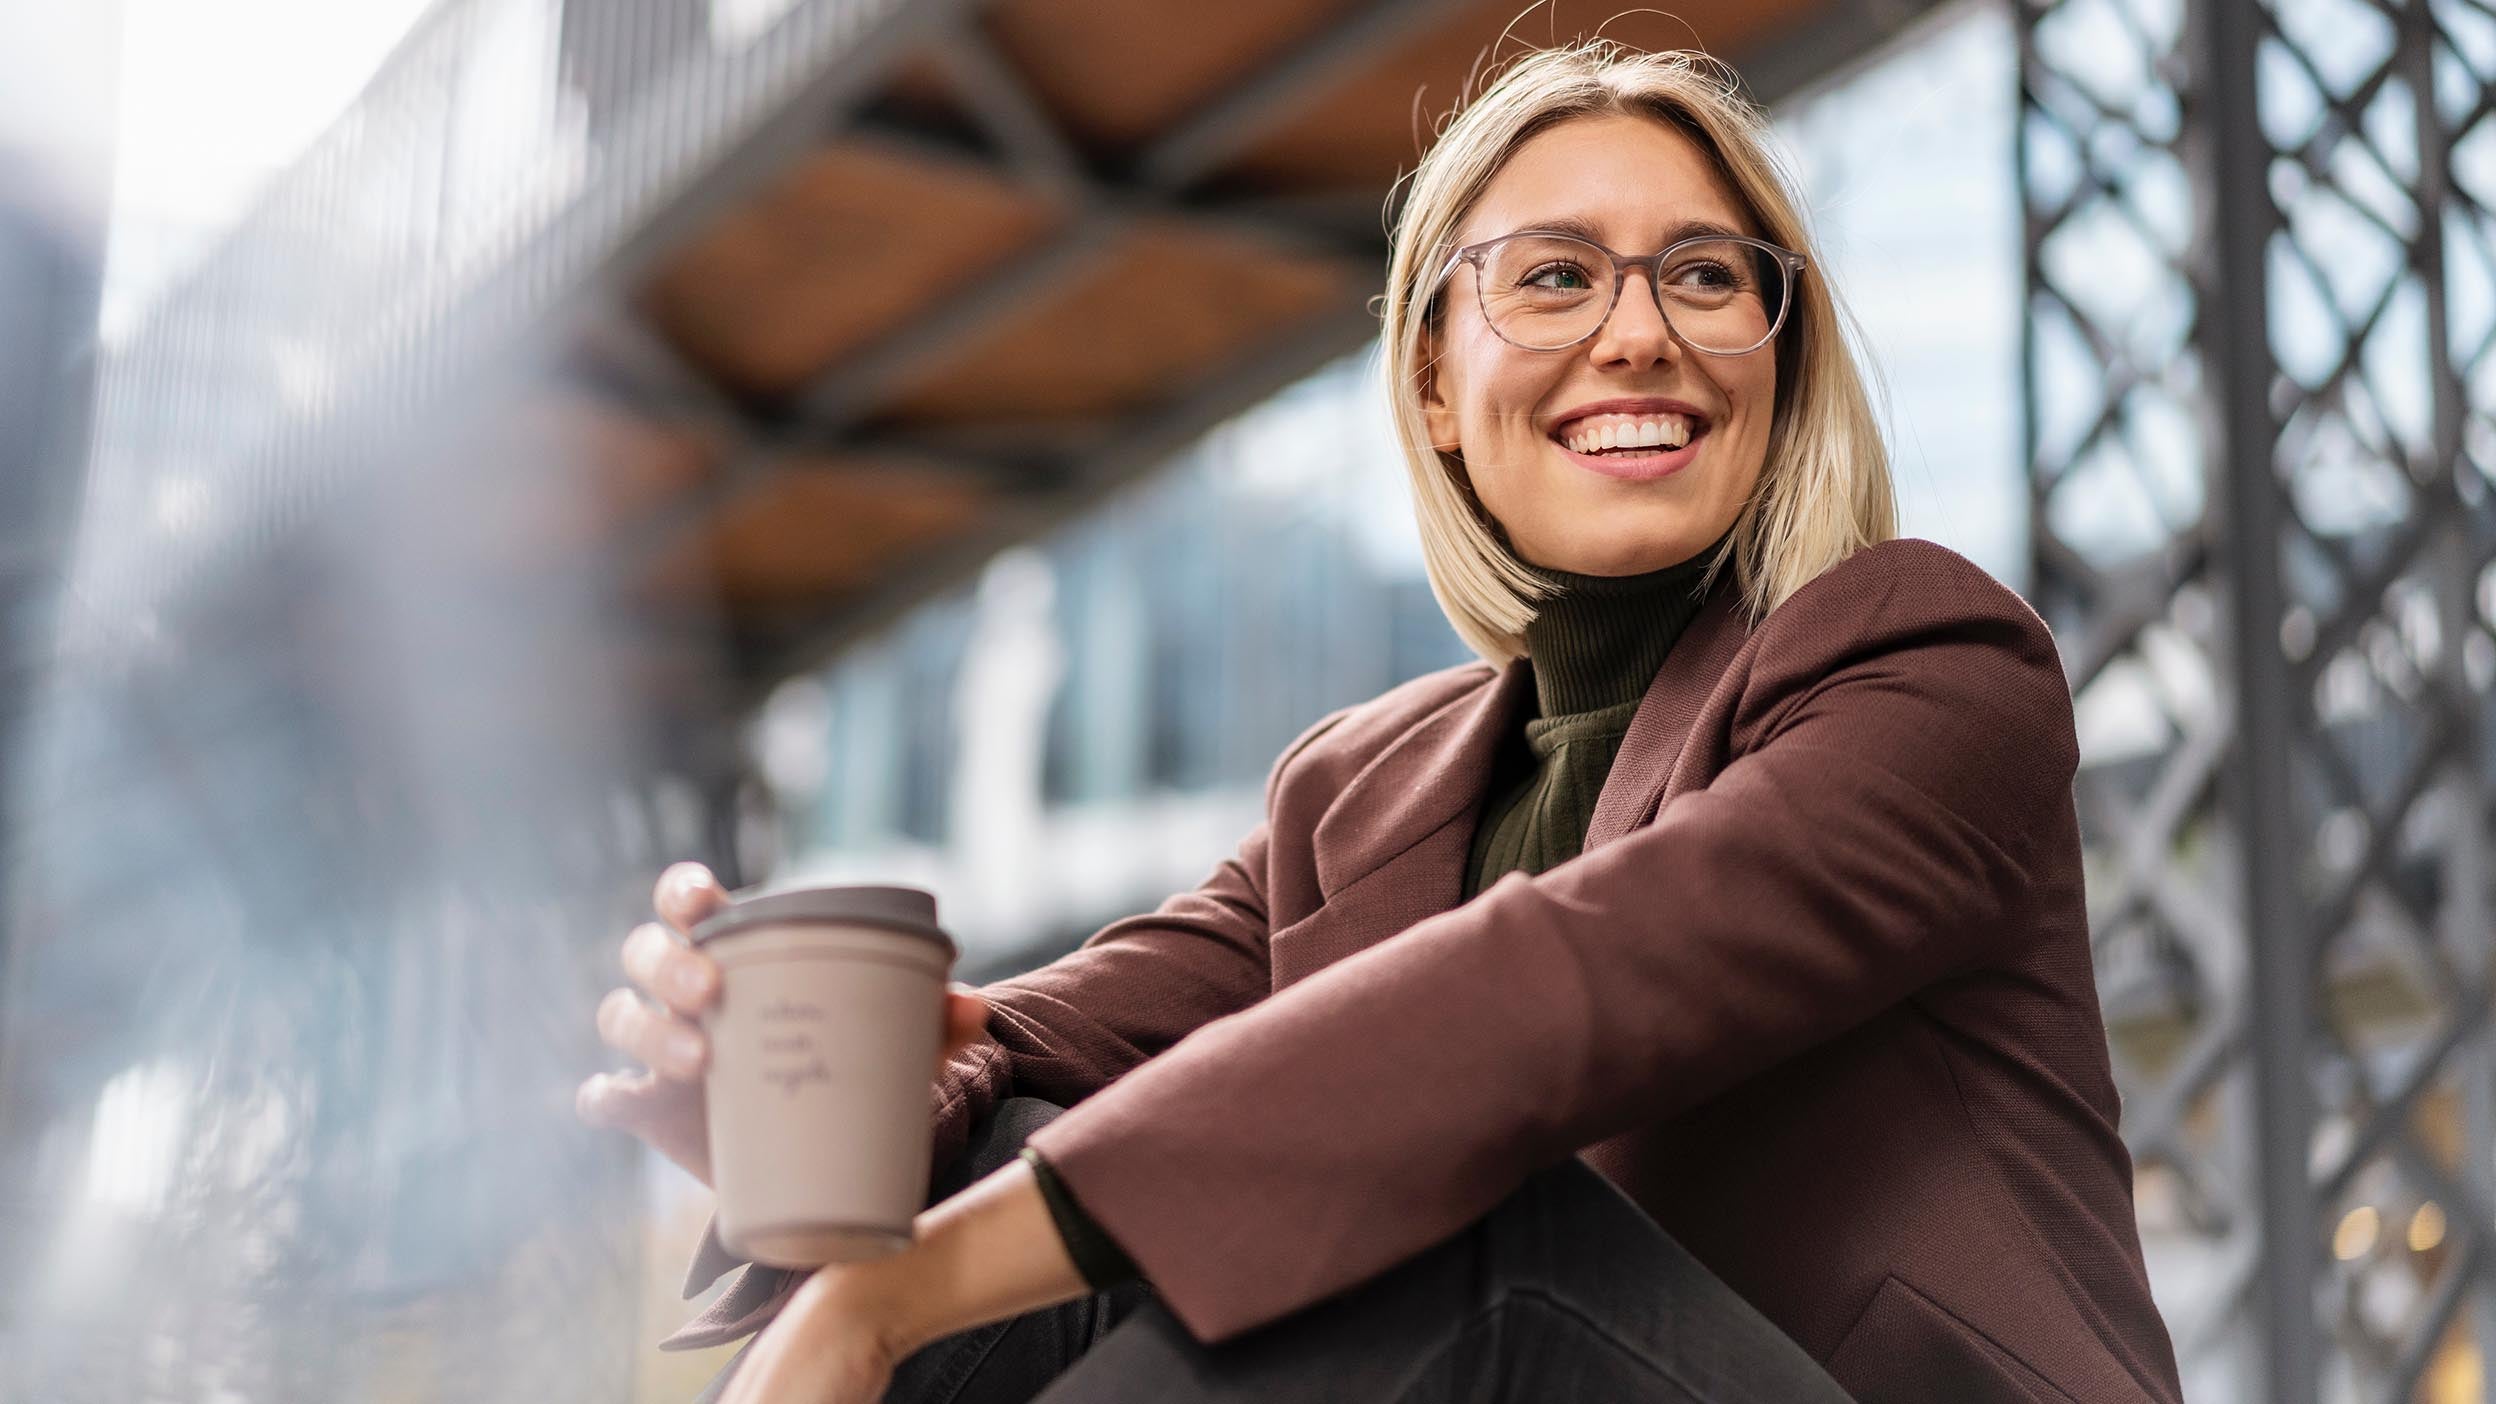 A young women enjoying a cup of coffee illustrates the way innovation is thriving in unexpected places—including some of the underlying holdings of Invesco QQQ ETF.